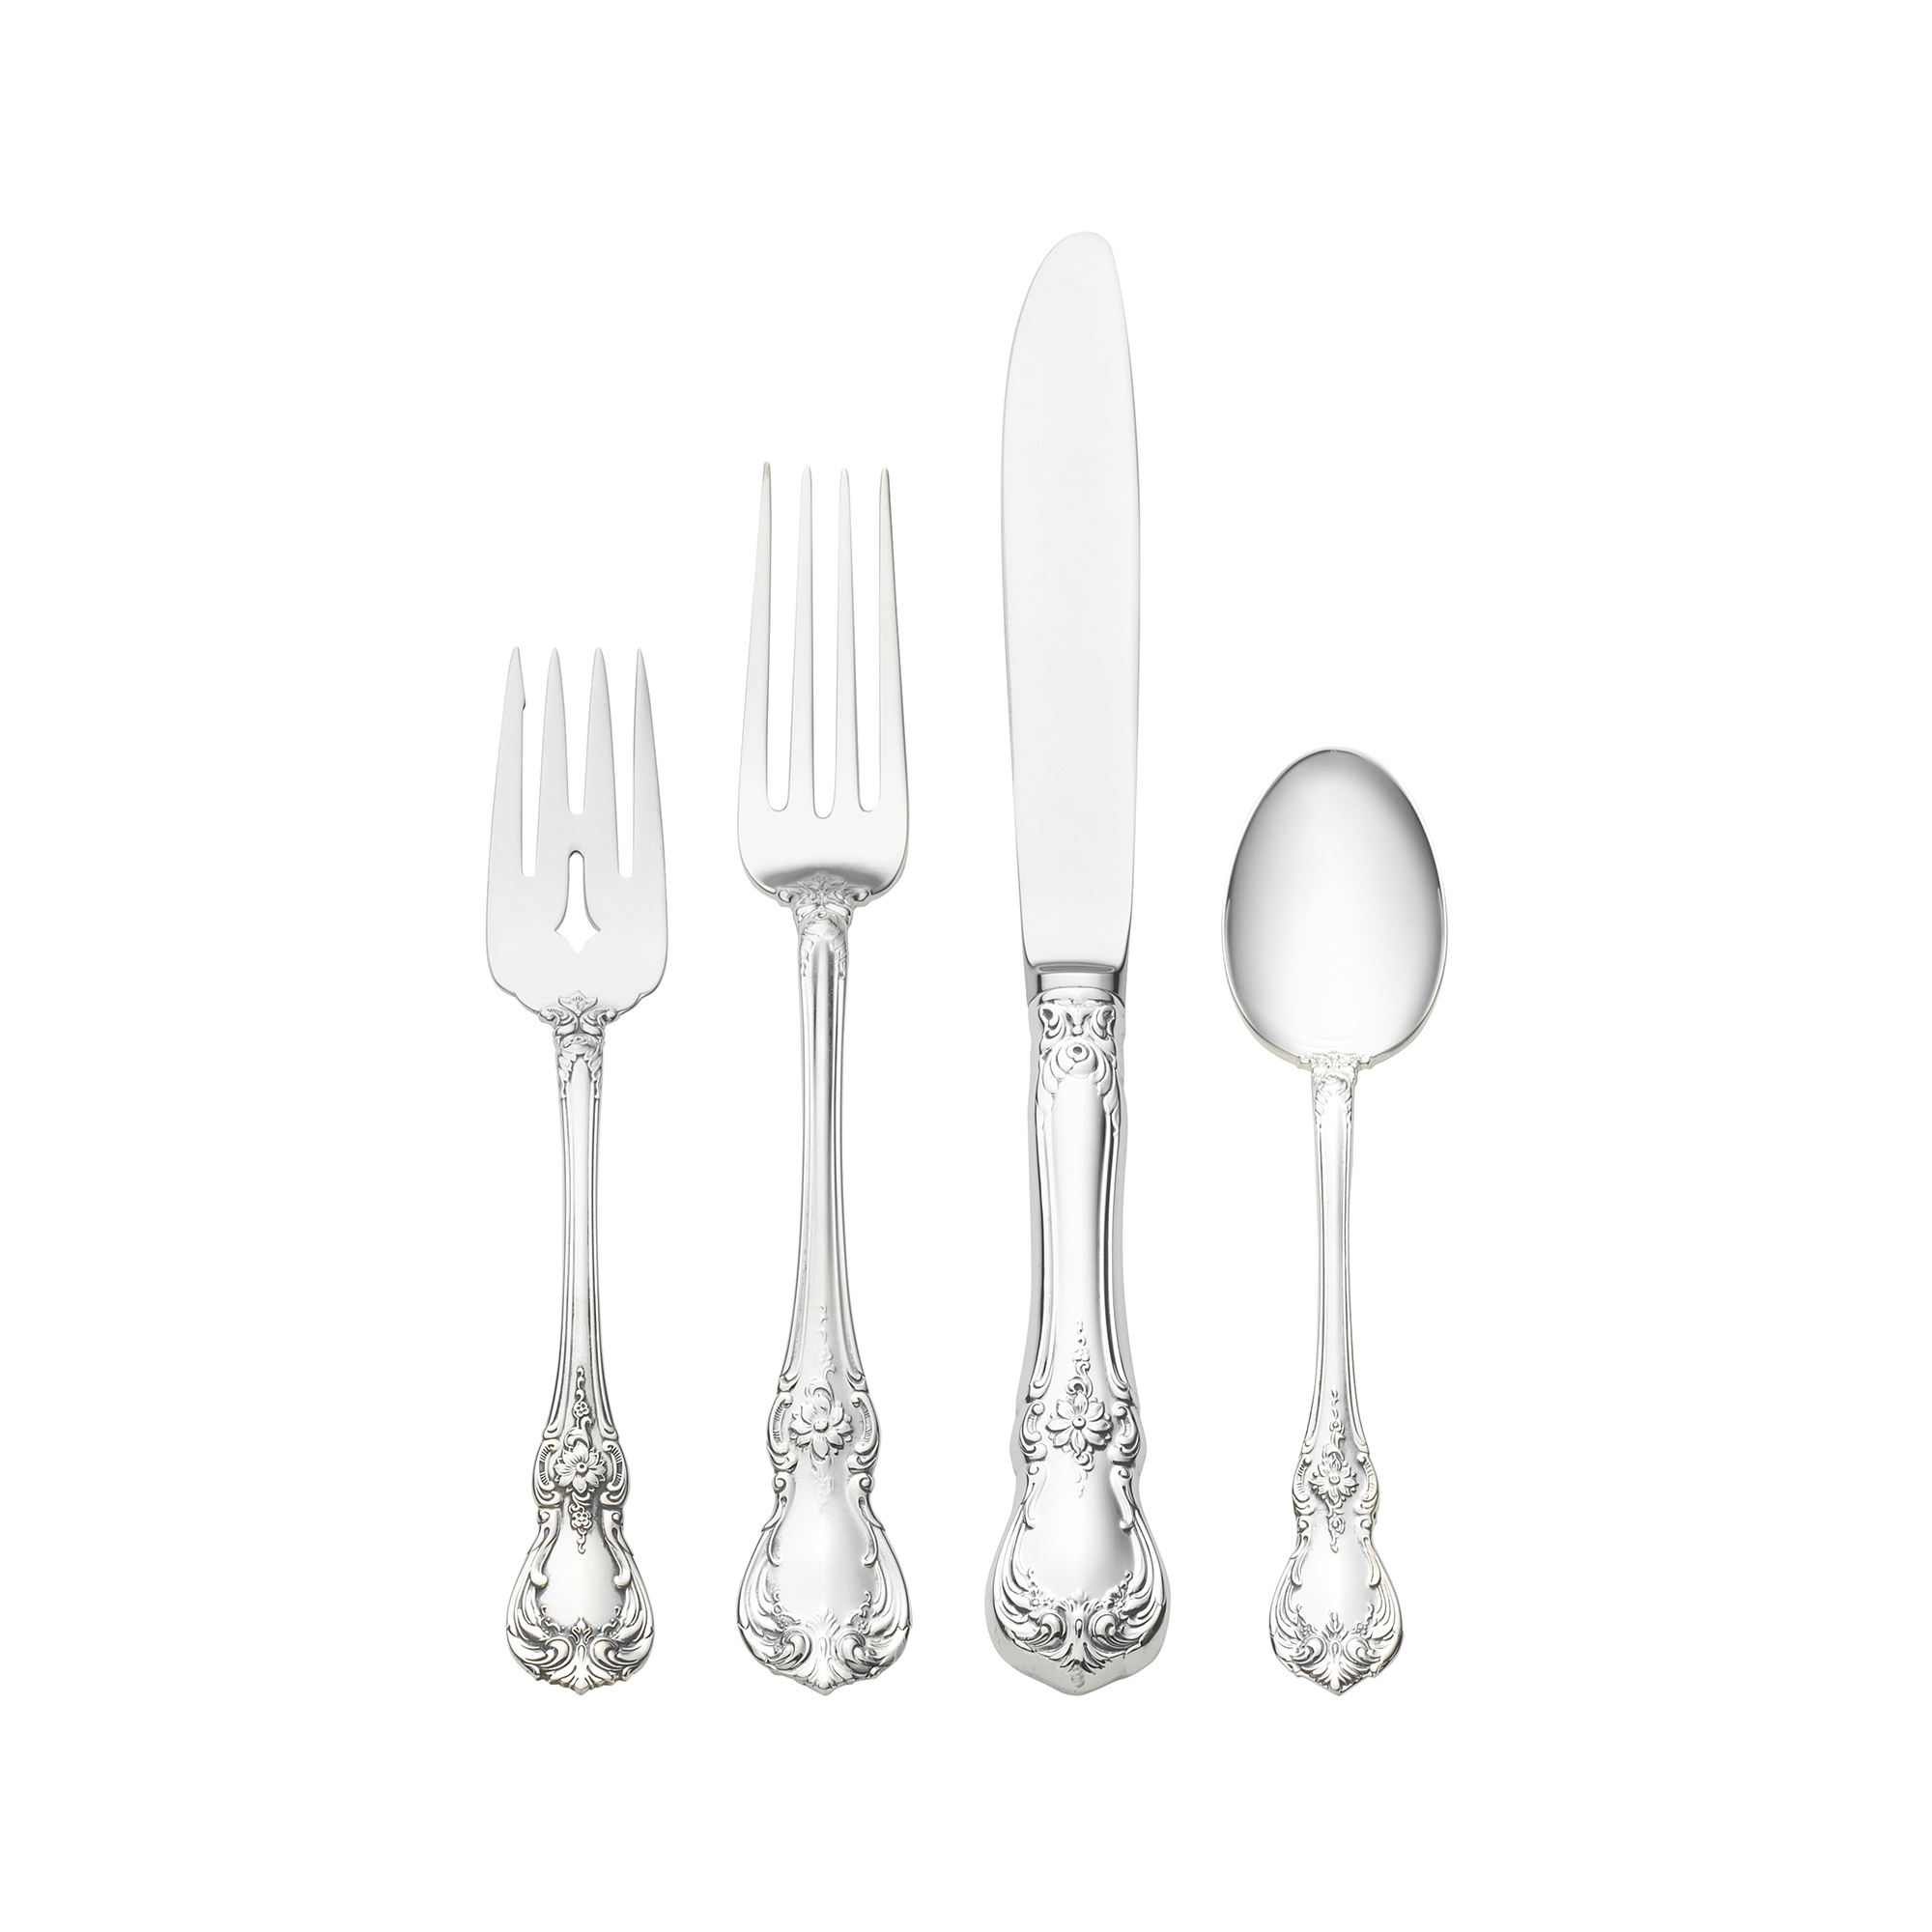 5-pc. Set - Towle "Old Master" Sterling Silver Dinner Setting | Ross-Simons